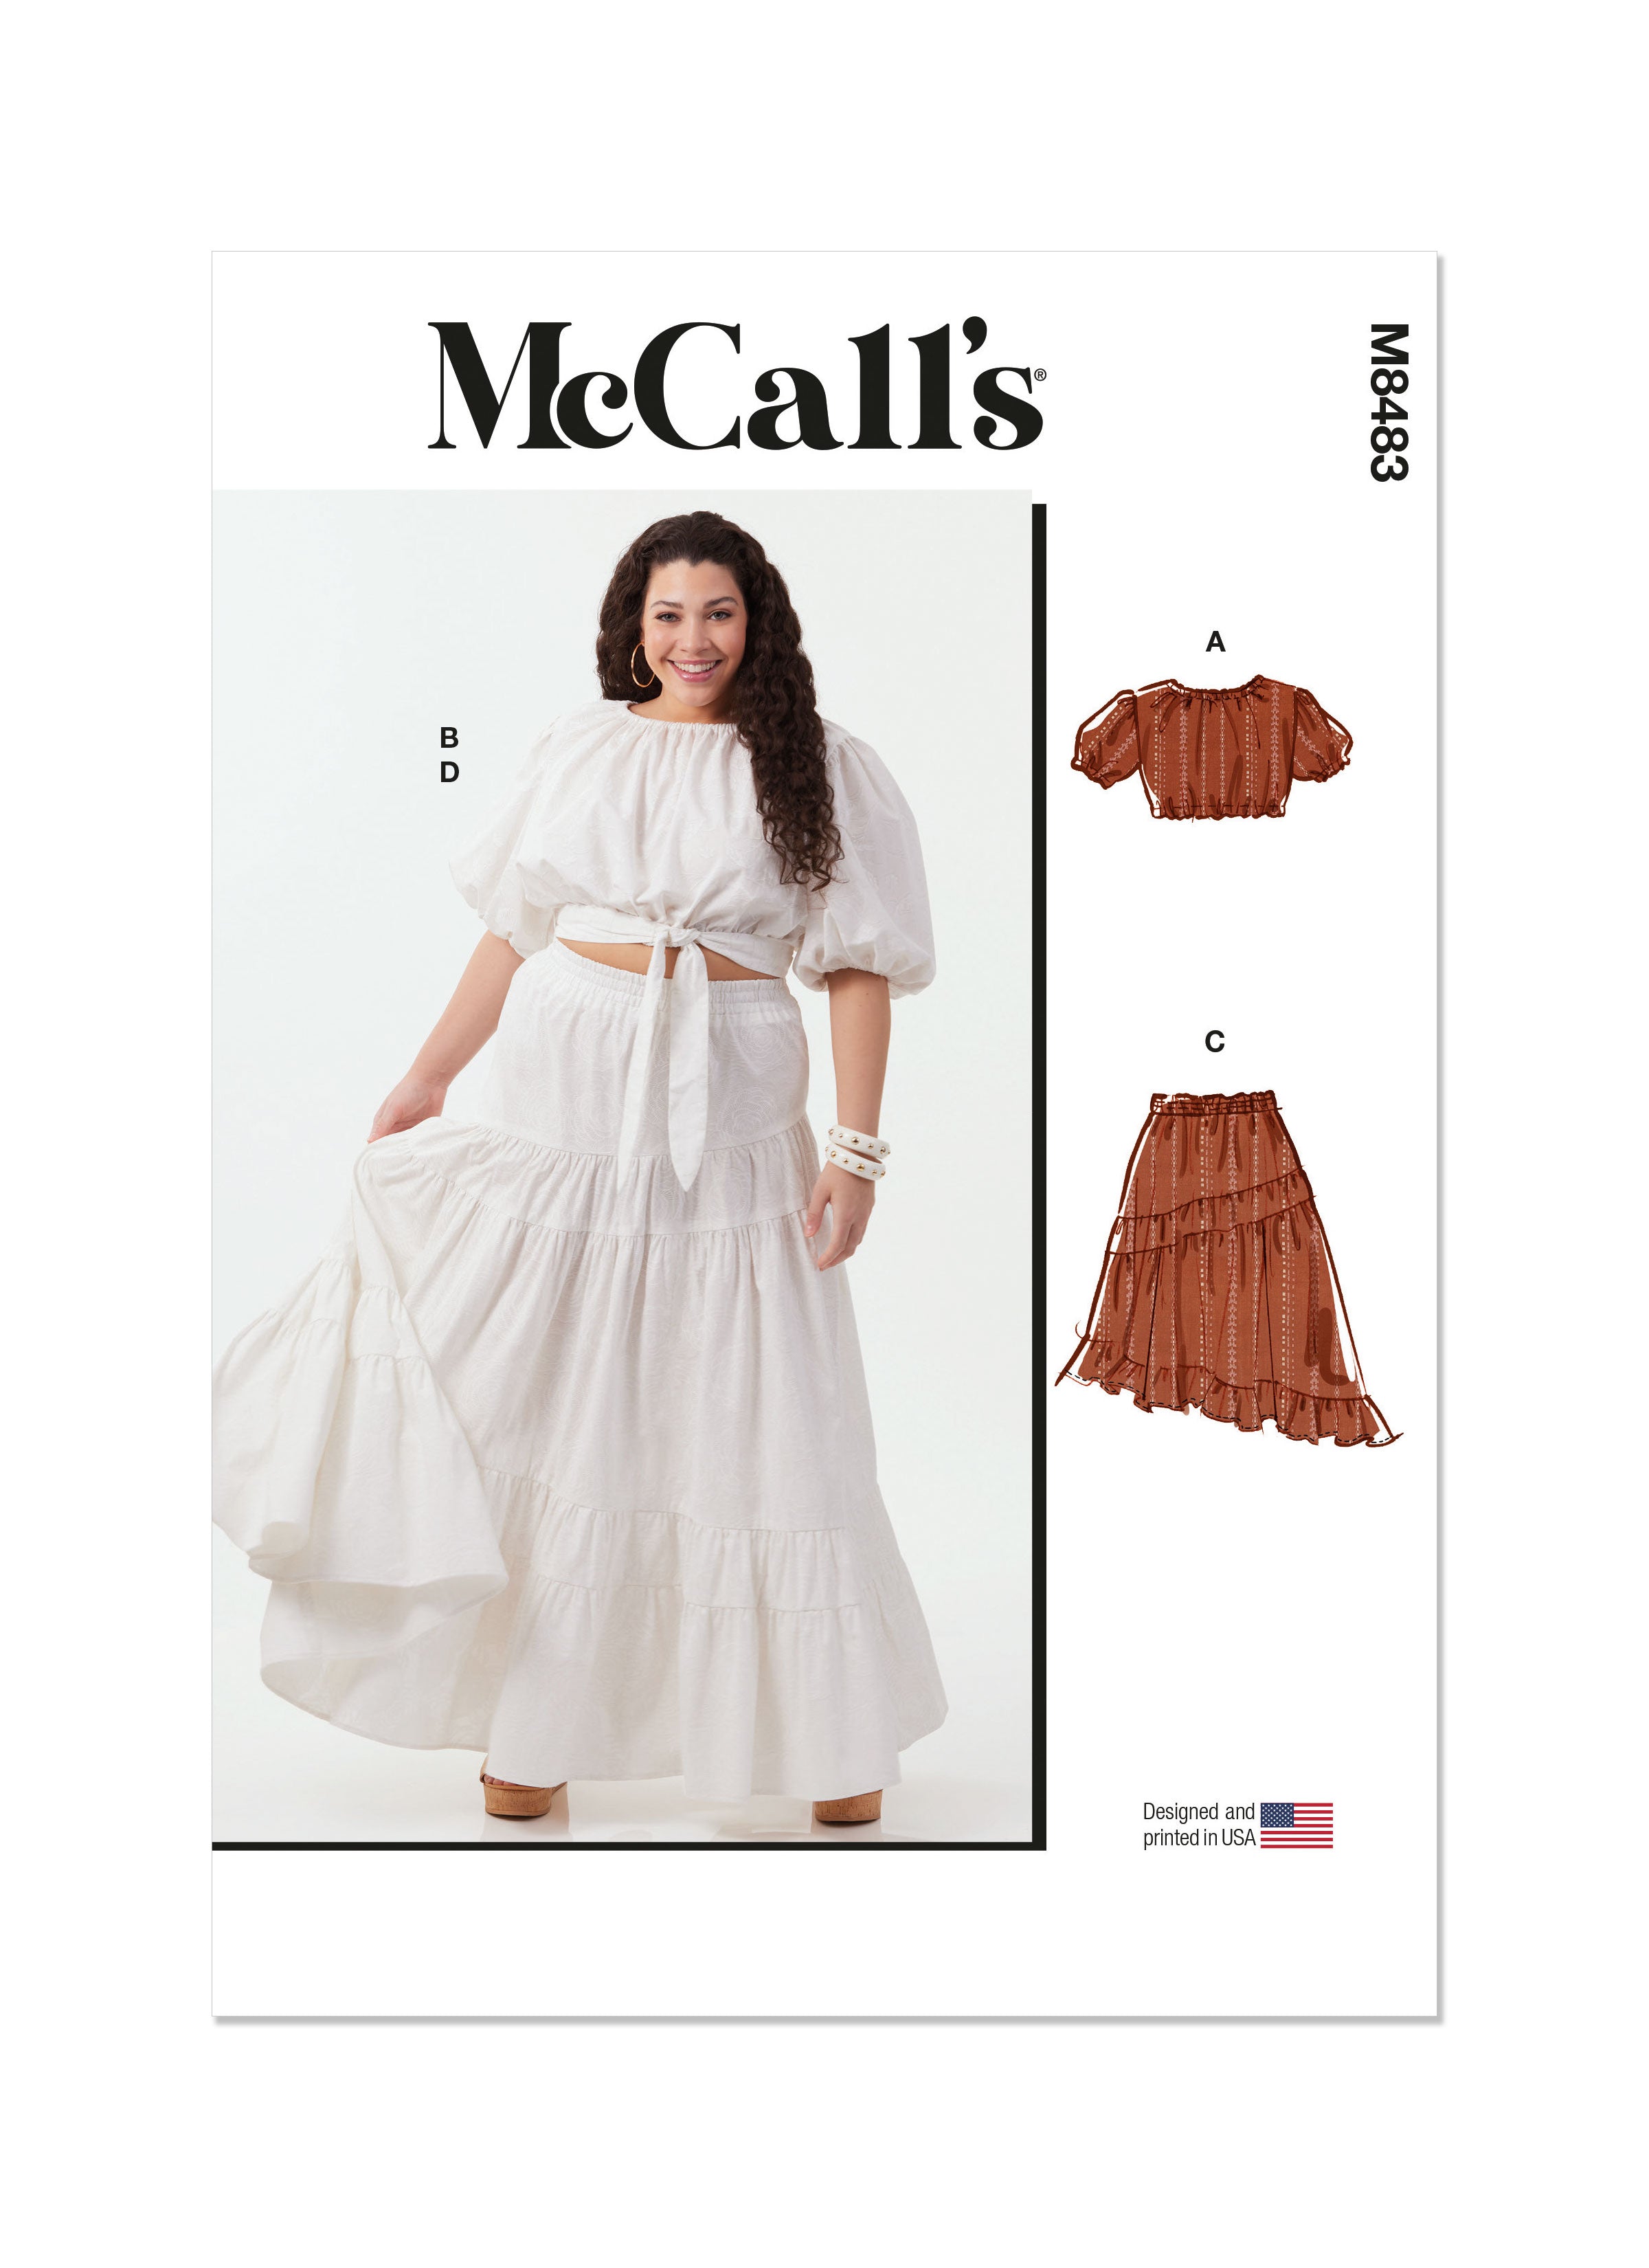 McCall's Sewing Pattern 8483 Women's Tops and Skirts from Jaycotts Sewing Supplies